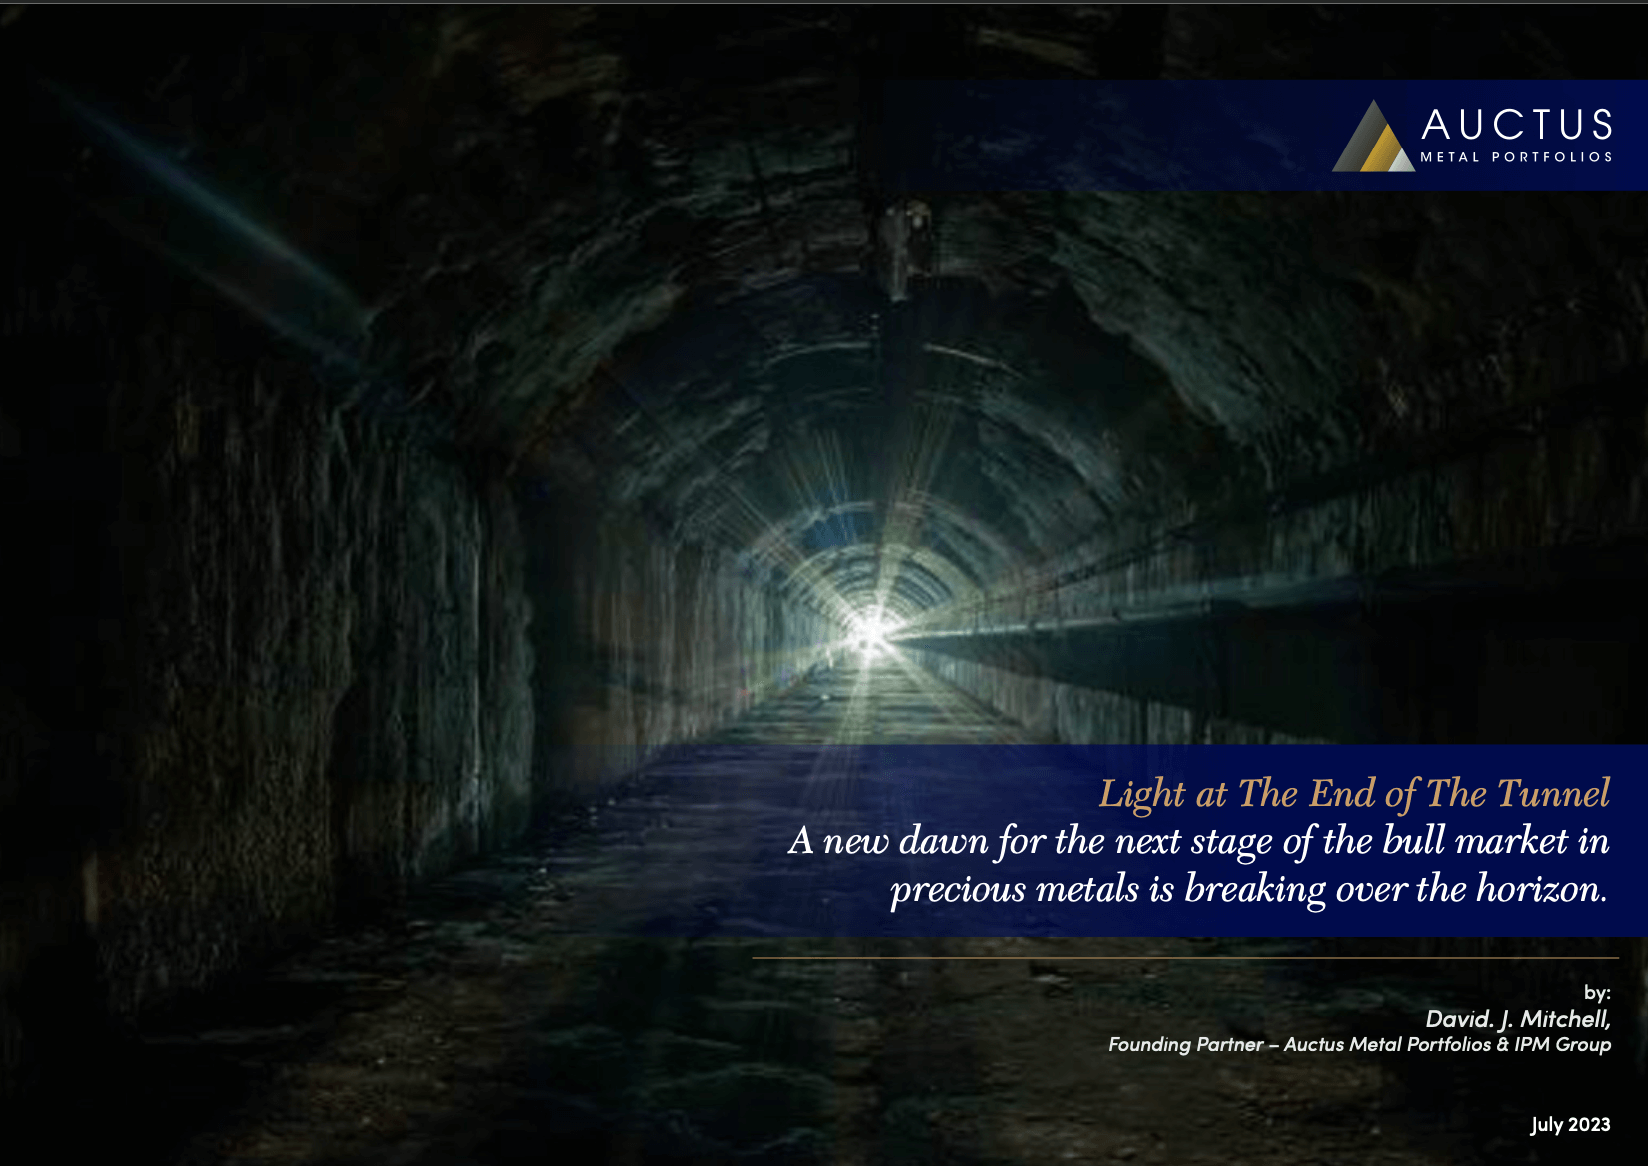 Read more about the article Light at The End of The Tunnel, by David J. Mitchell, Founding Partner of Auctus Metal Portfolios.